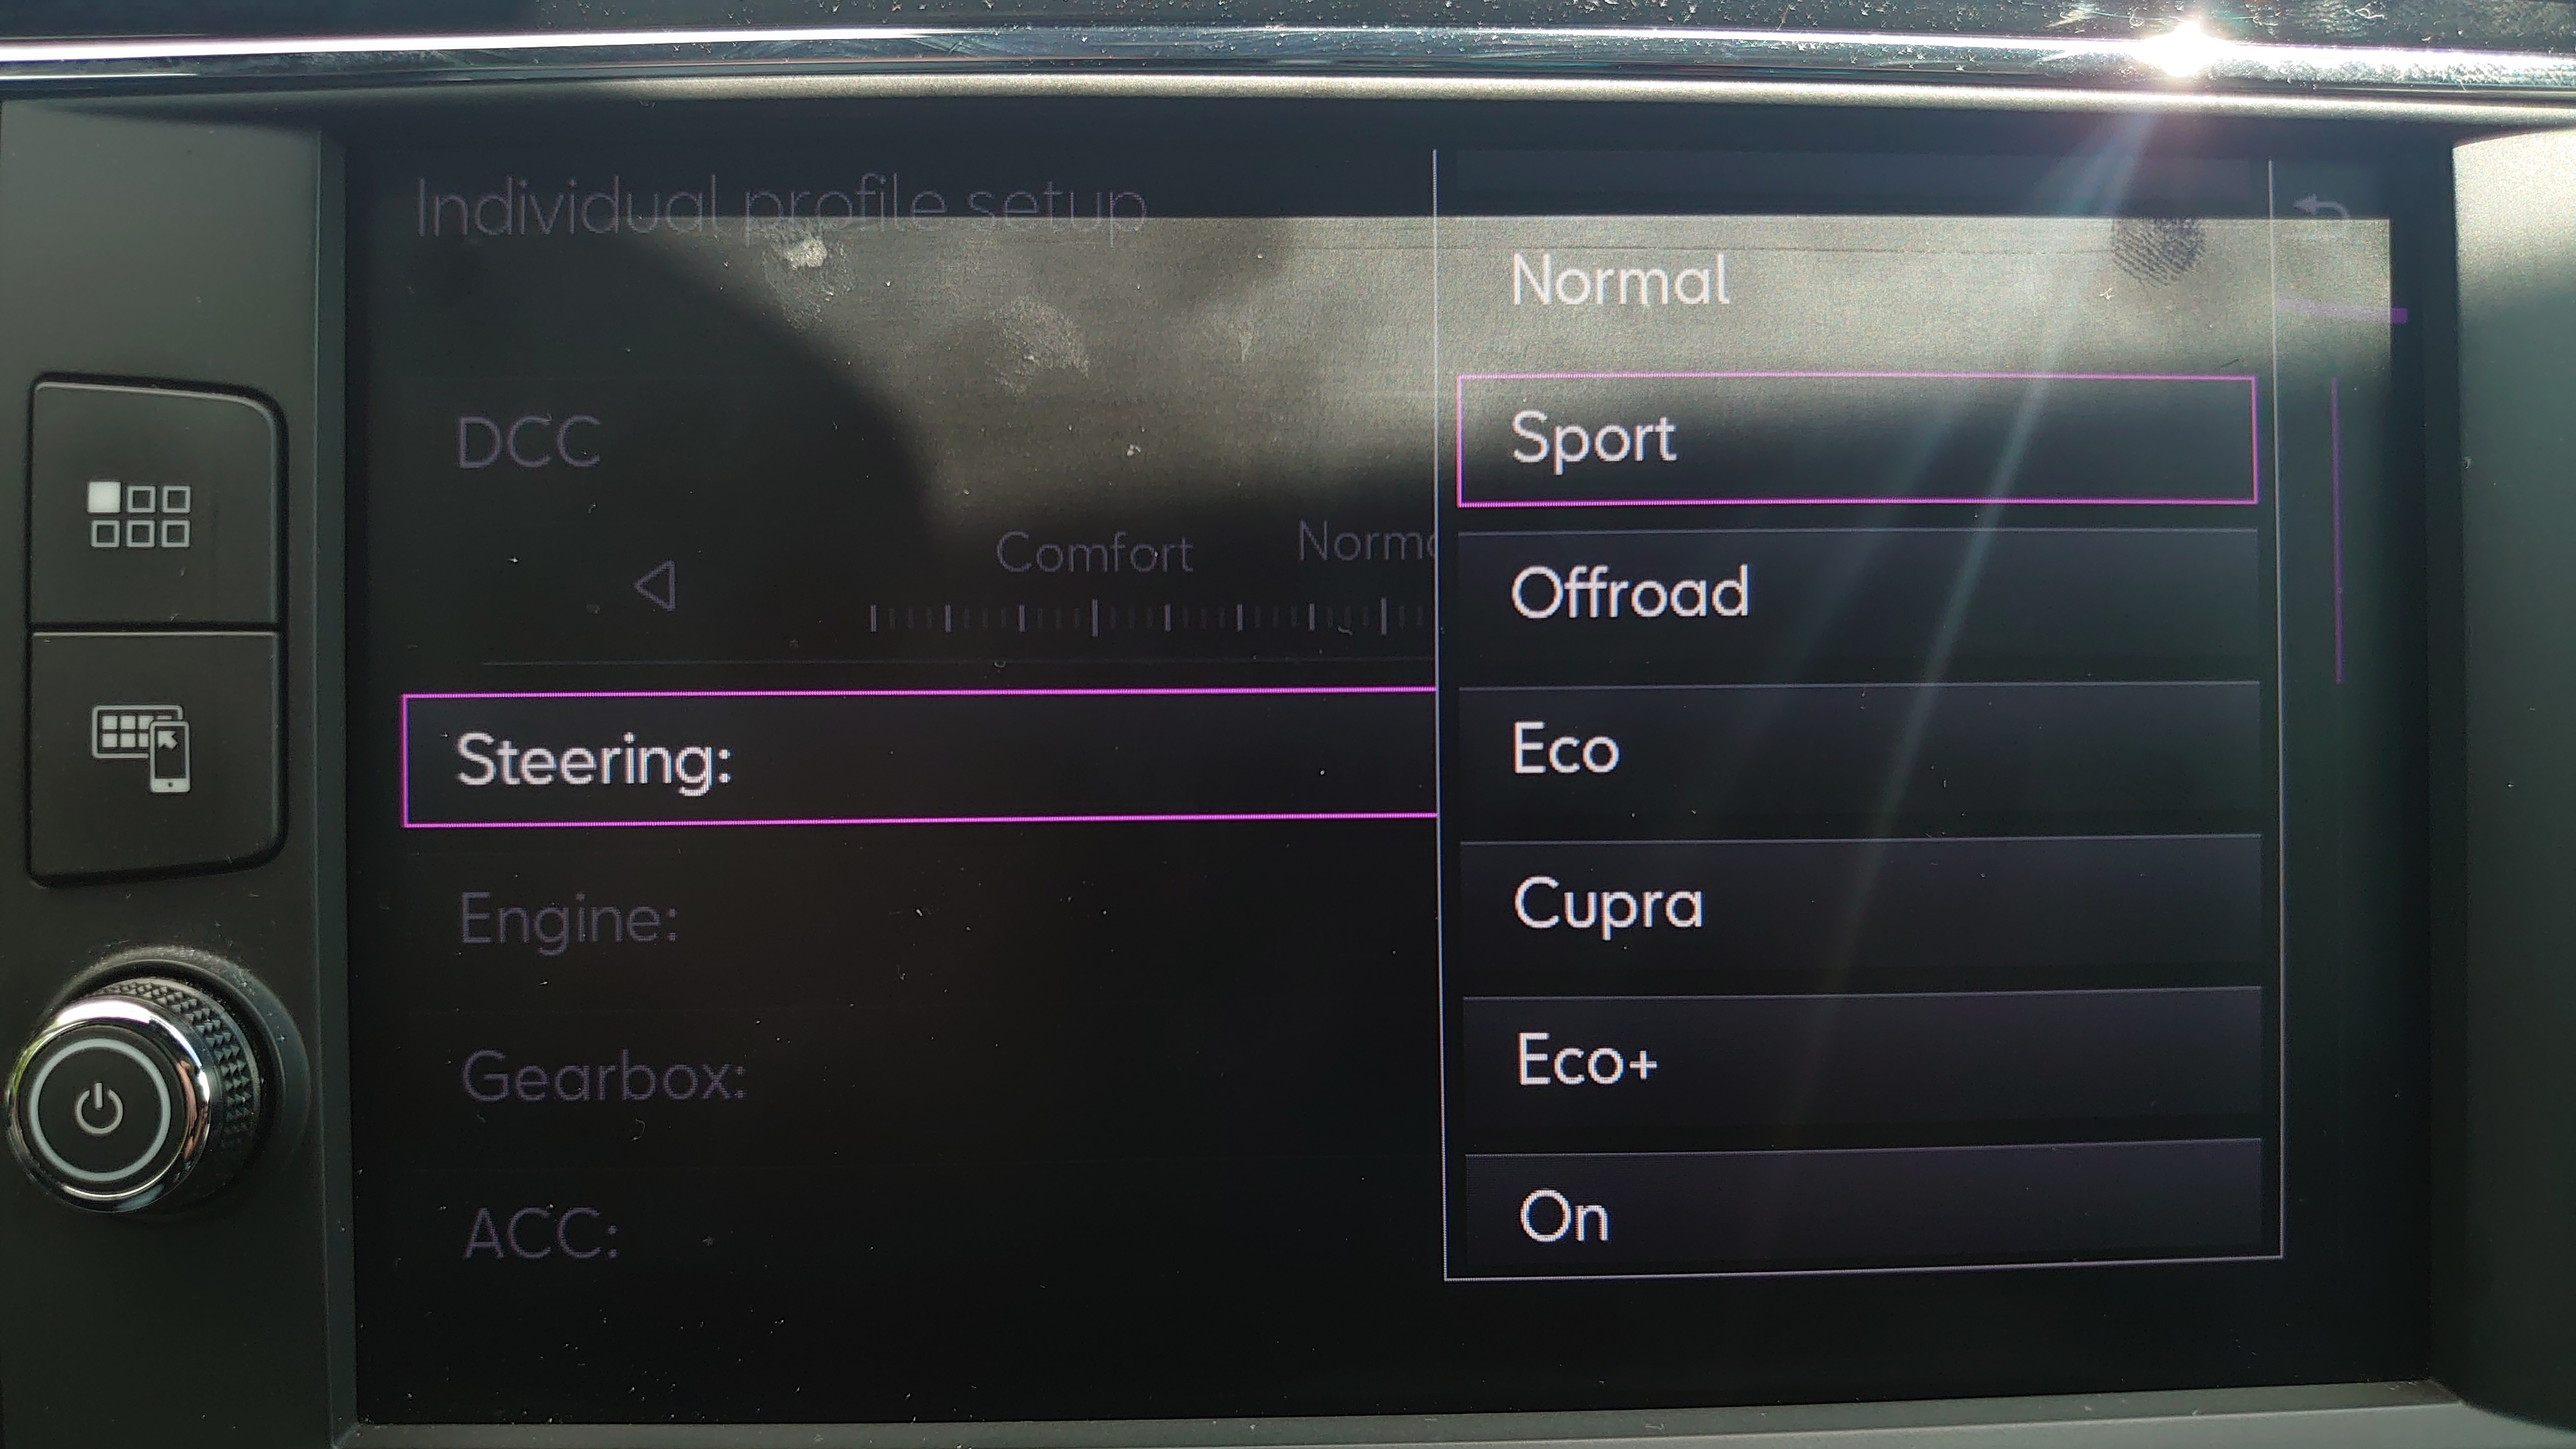 Your Car Has Driving Profiles – Here’s How To Change Them